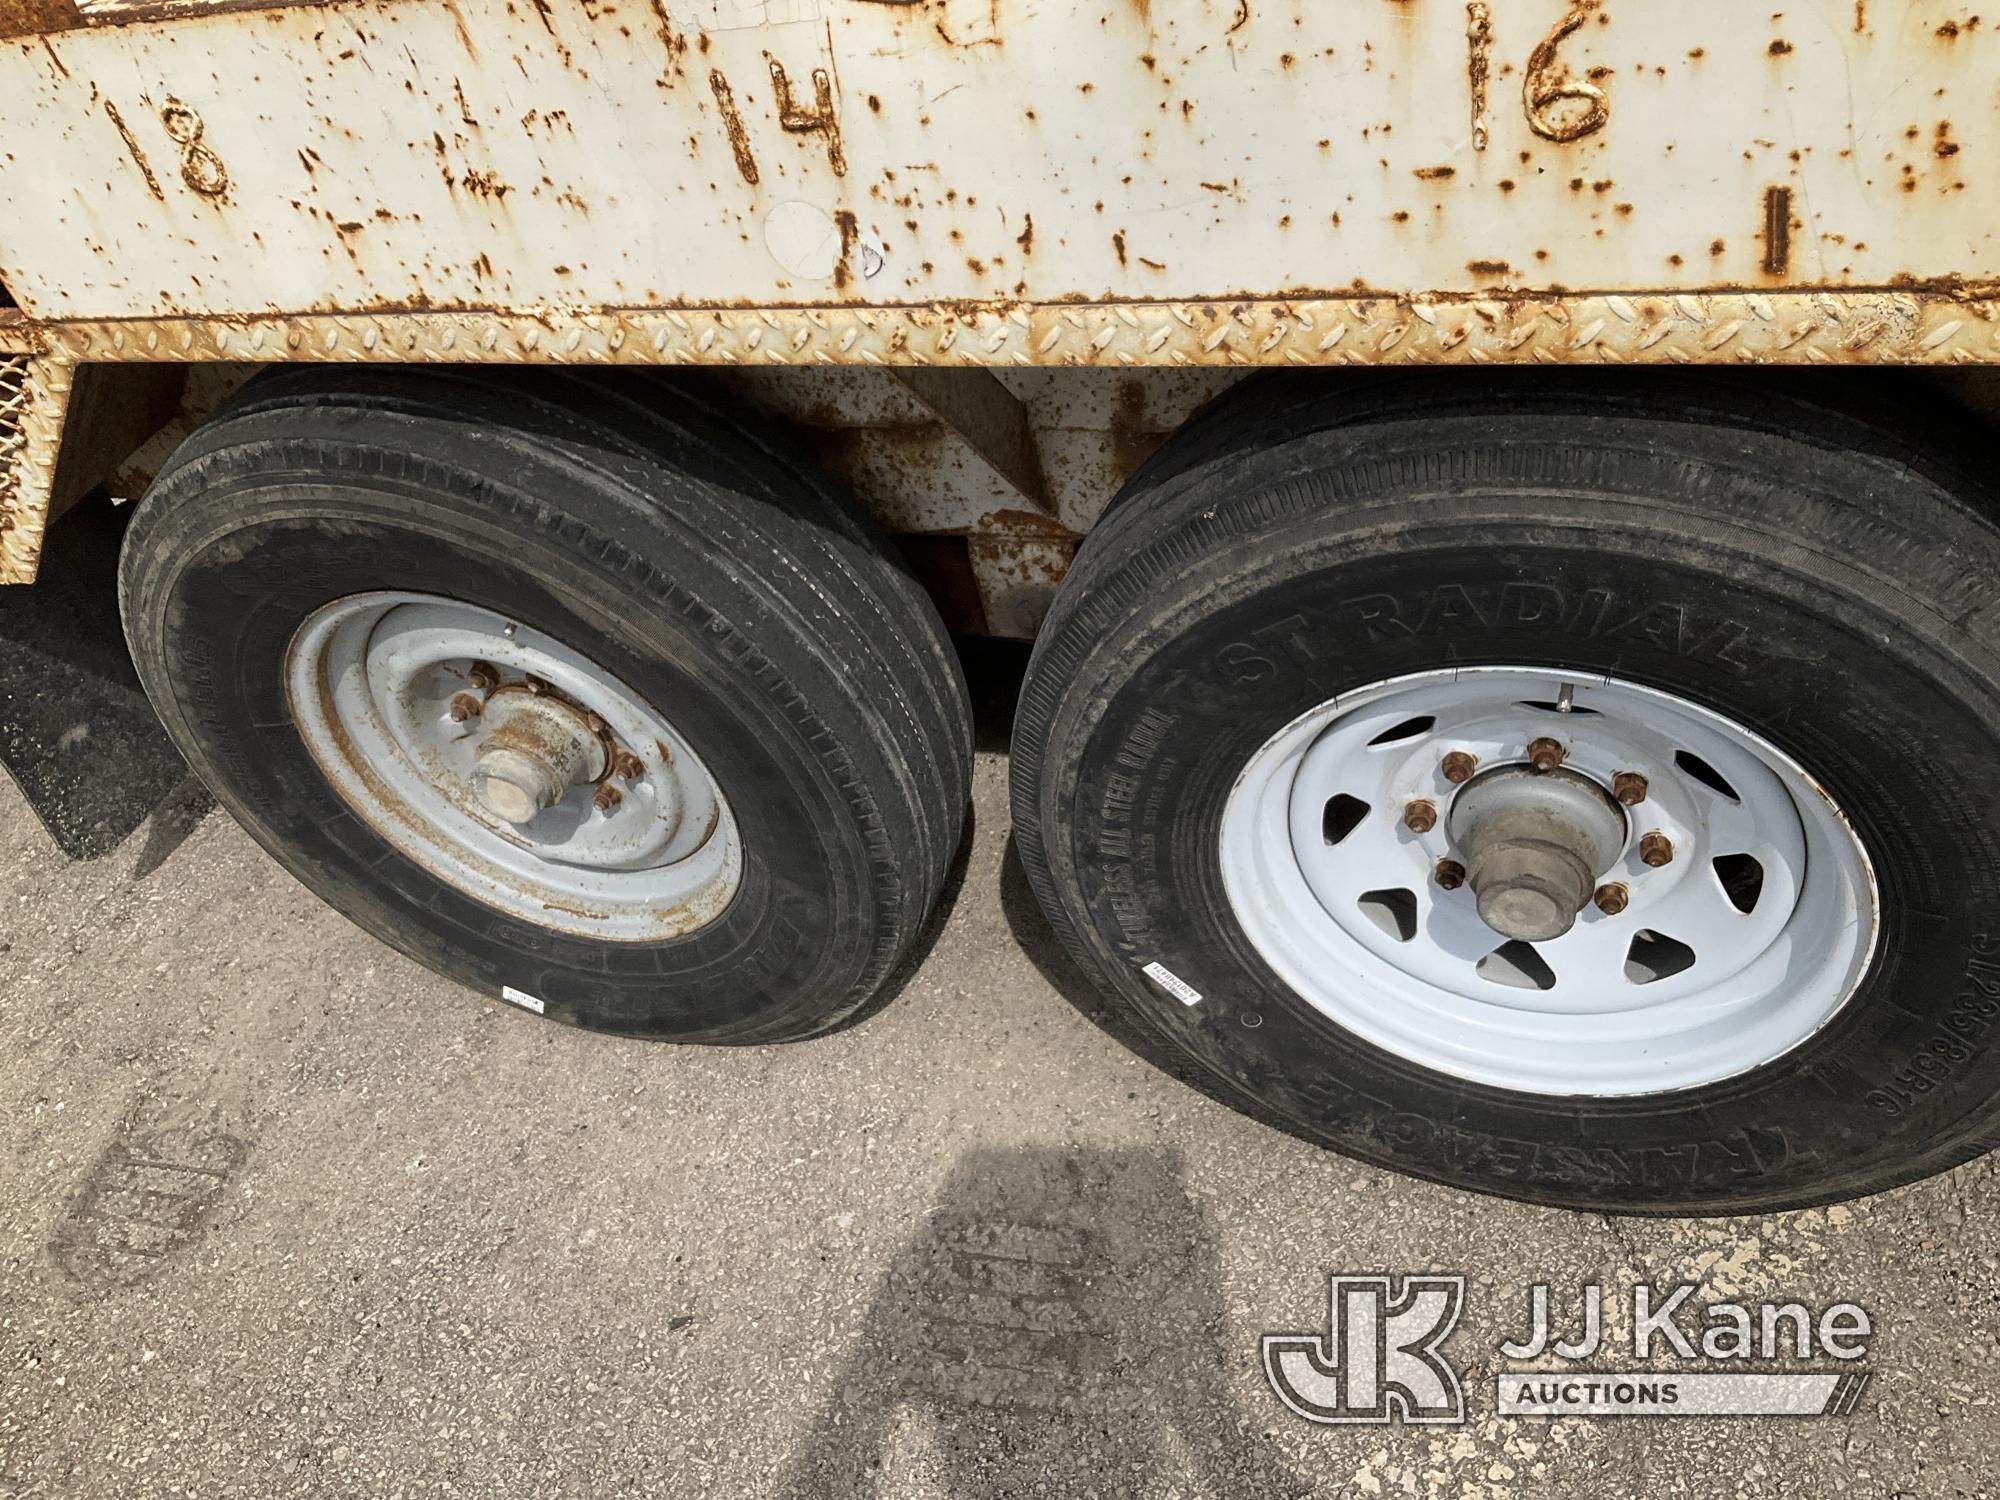 (Kansas City, MO) 2007 Brooks Brothers Extendable T/A Material/Pole Trailer Has Rust, Low Passenger